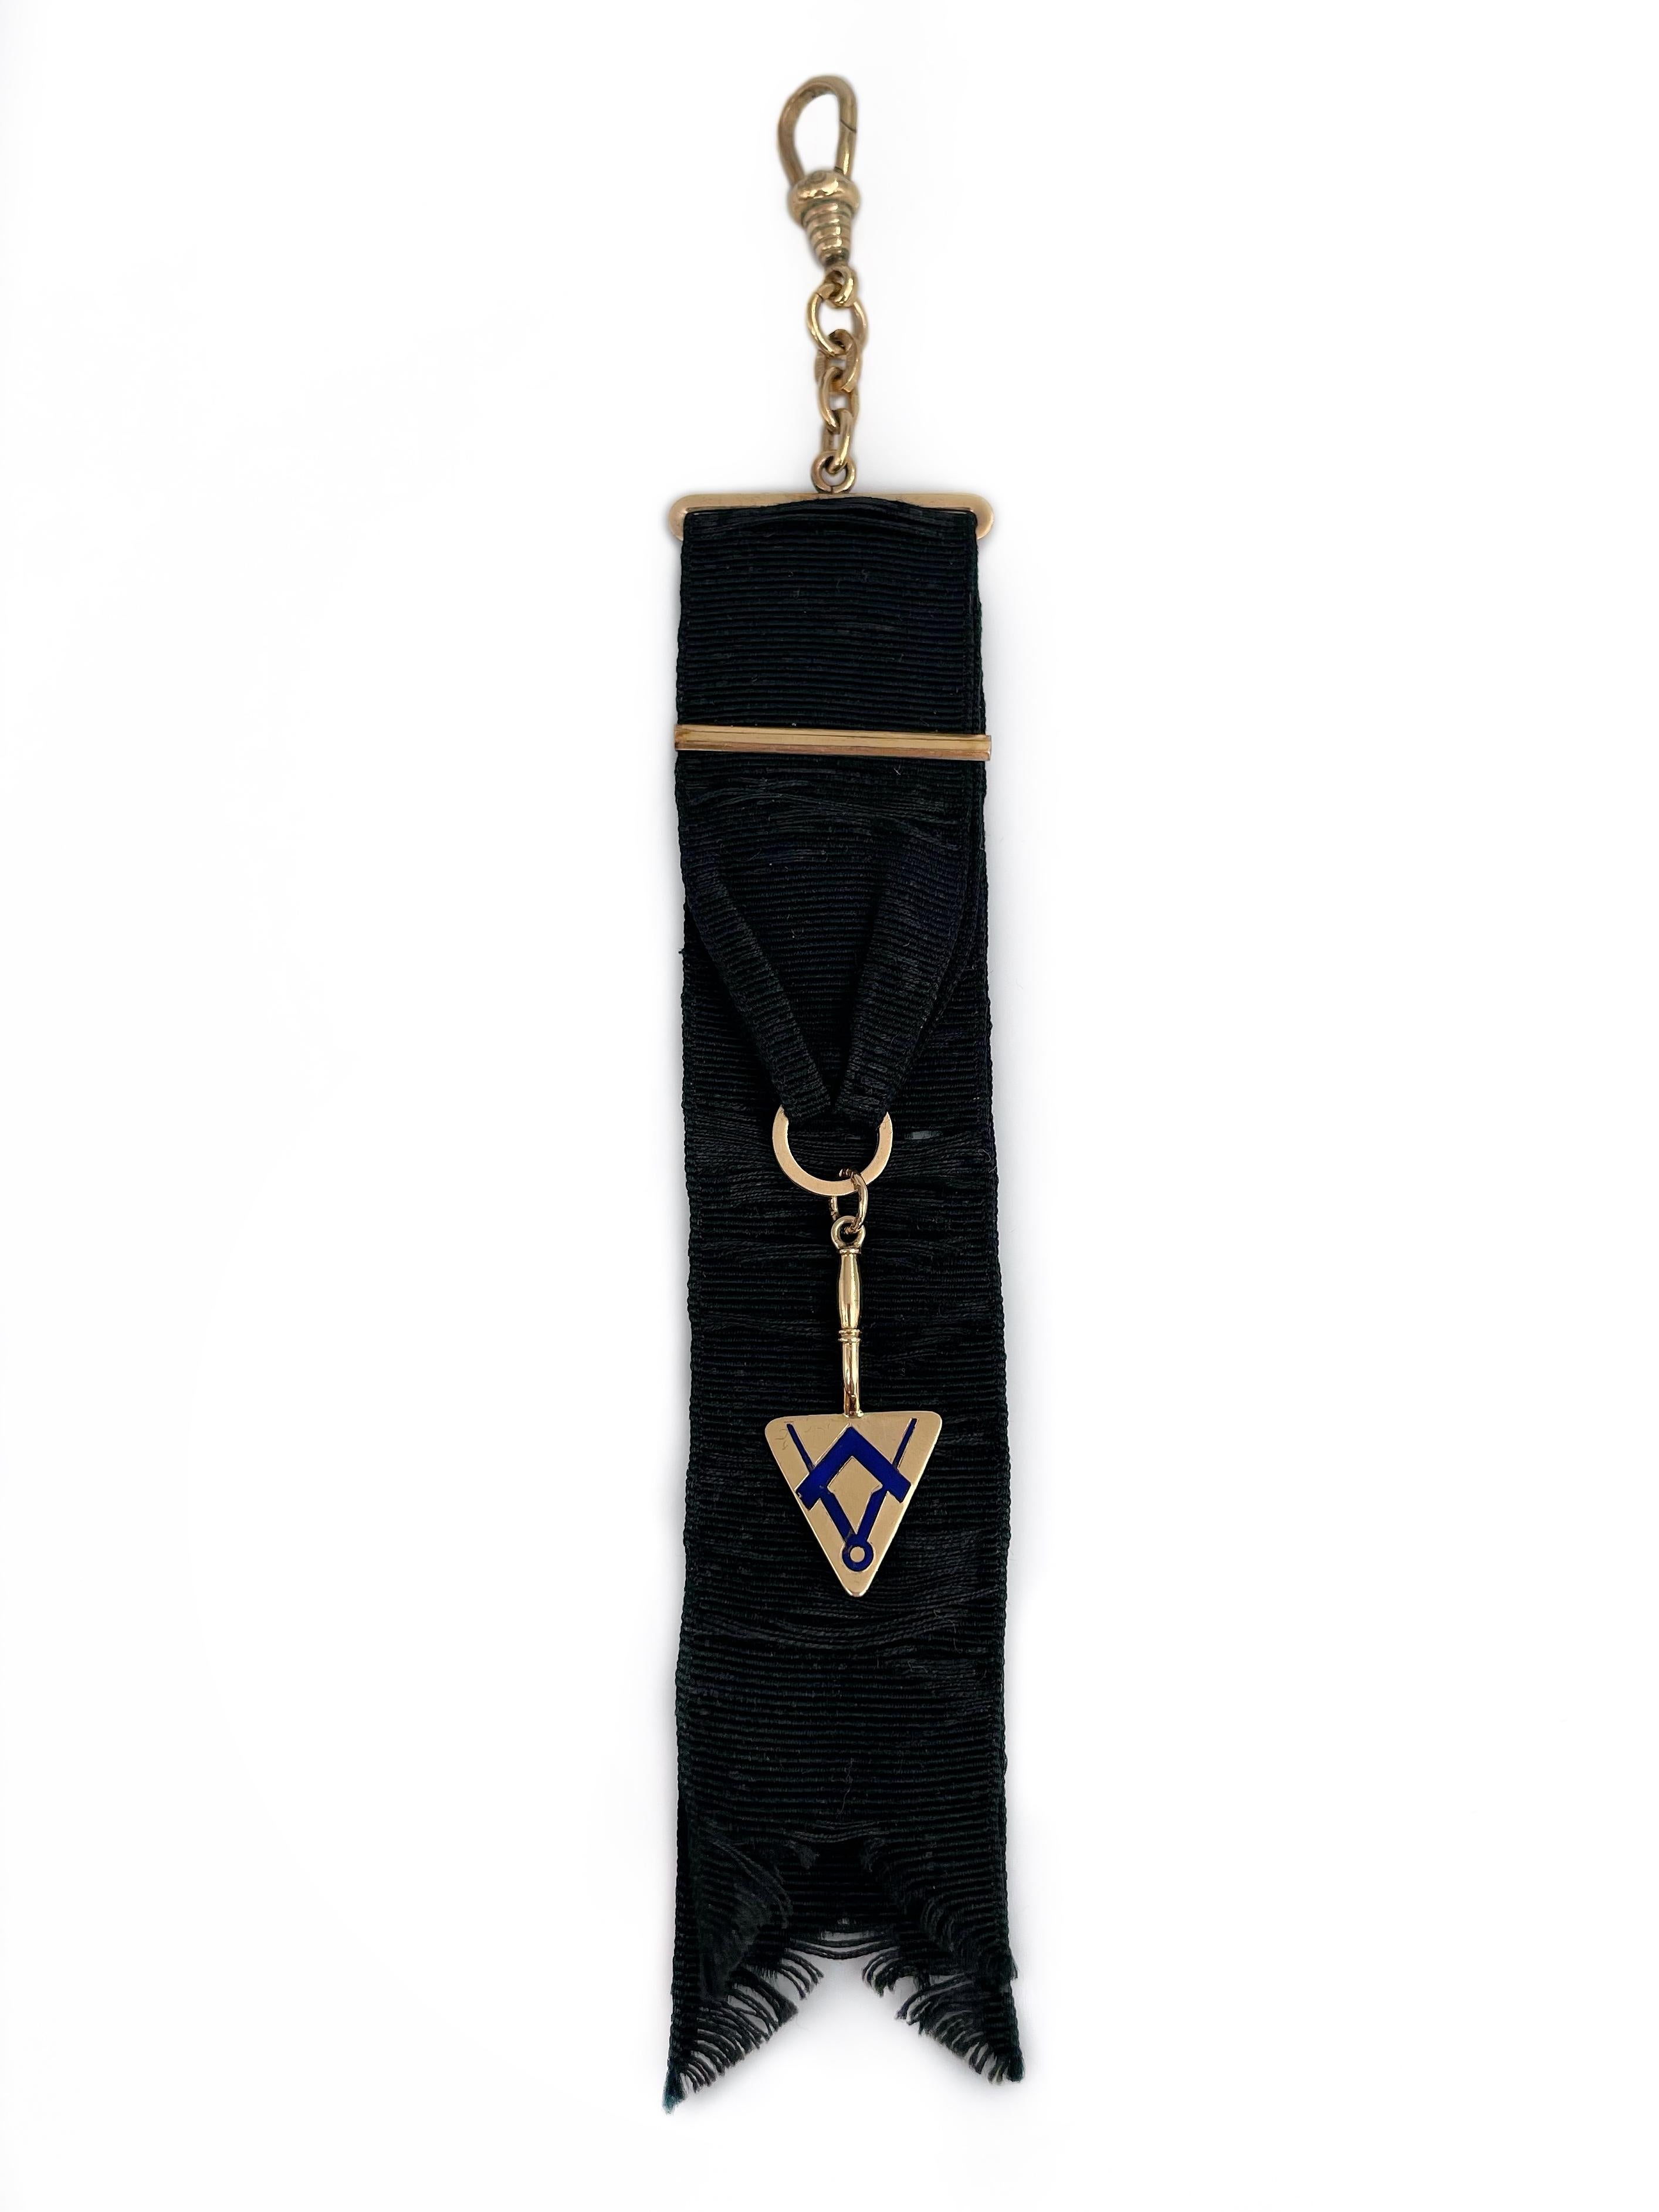 This is a Masonic watch fob pendant. Circa 1930. 

The piece features a black silk grosgrain ribbon. The trowel attached to the fabric is crafted in 18K gold. There is a “square and compasses” symbol inlayed with blue enamel. 

Weight: 6.85g
Ribbon